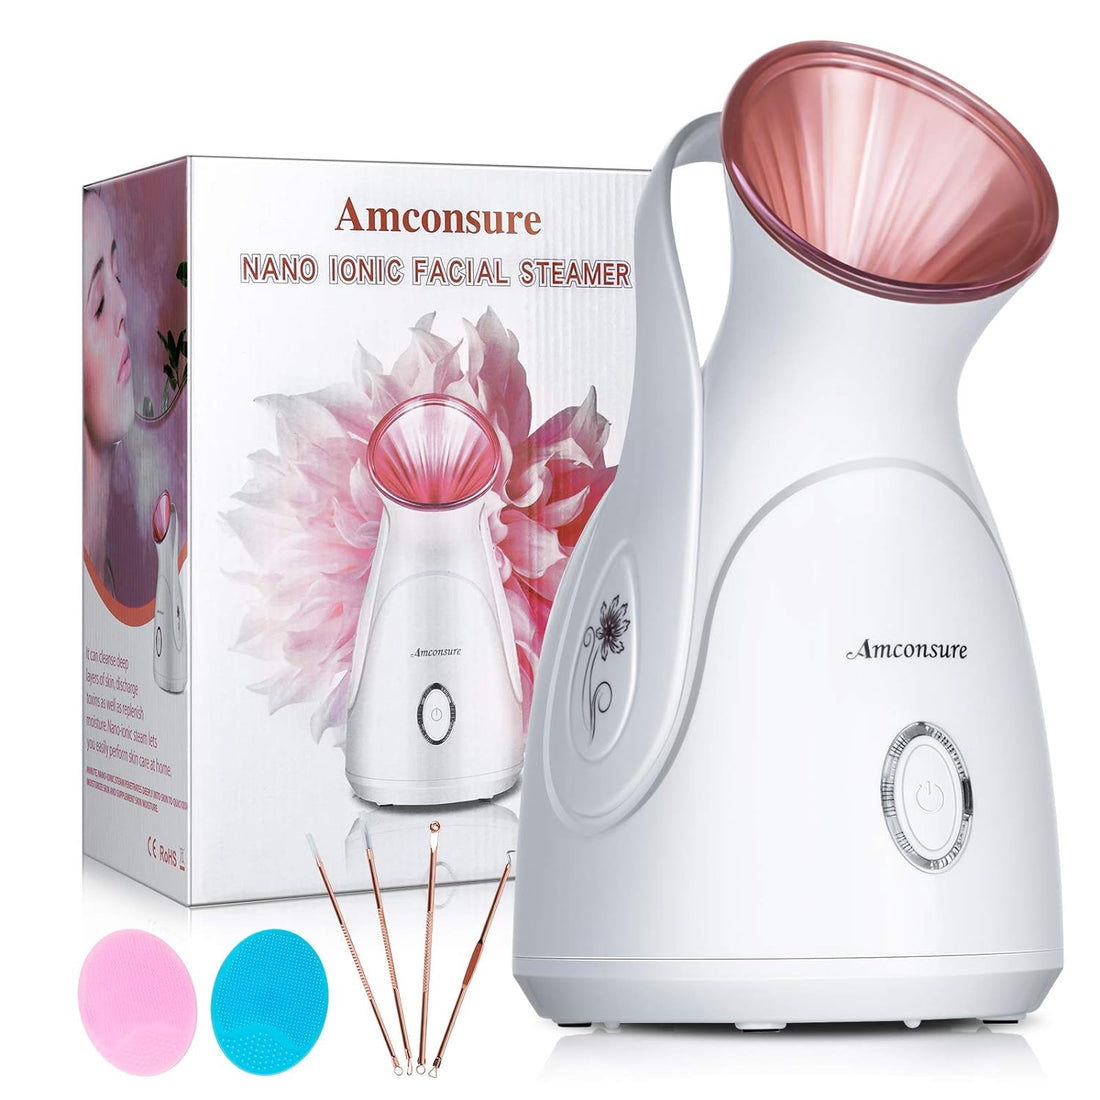 Amconsure Facial Steamer,Nano Ionic Face Steamer For Home Facial,100Ml Warm Mist Humidifier For Women Moisturizing Face Spa Steamer,Unclogs Pores-Bonus Stainless Steel Skin Kit And 2 Face Scrubbers